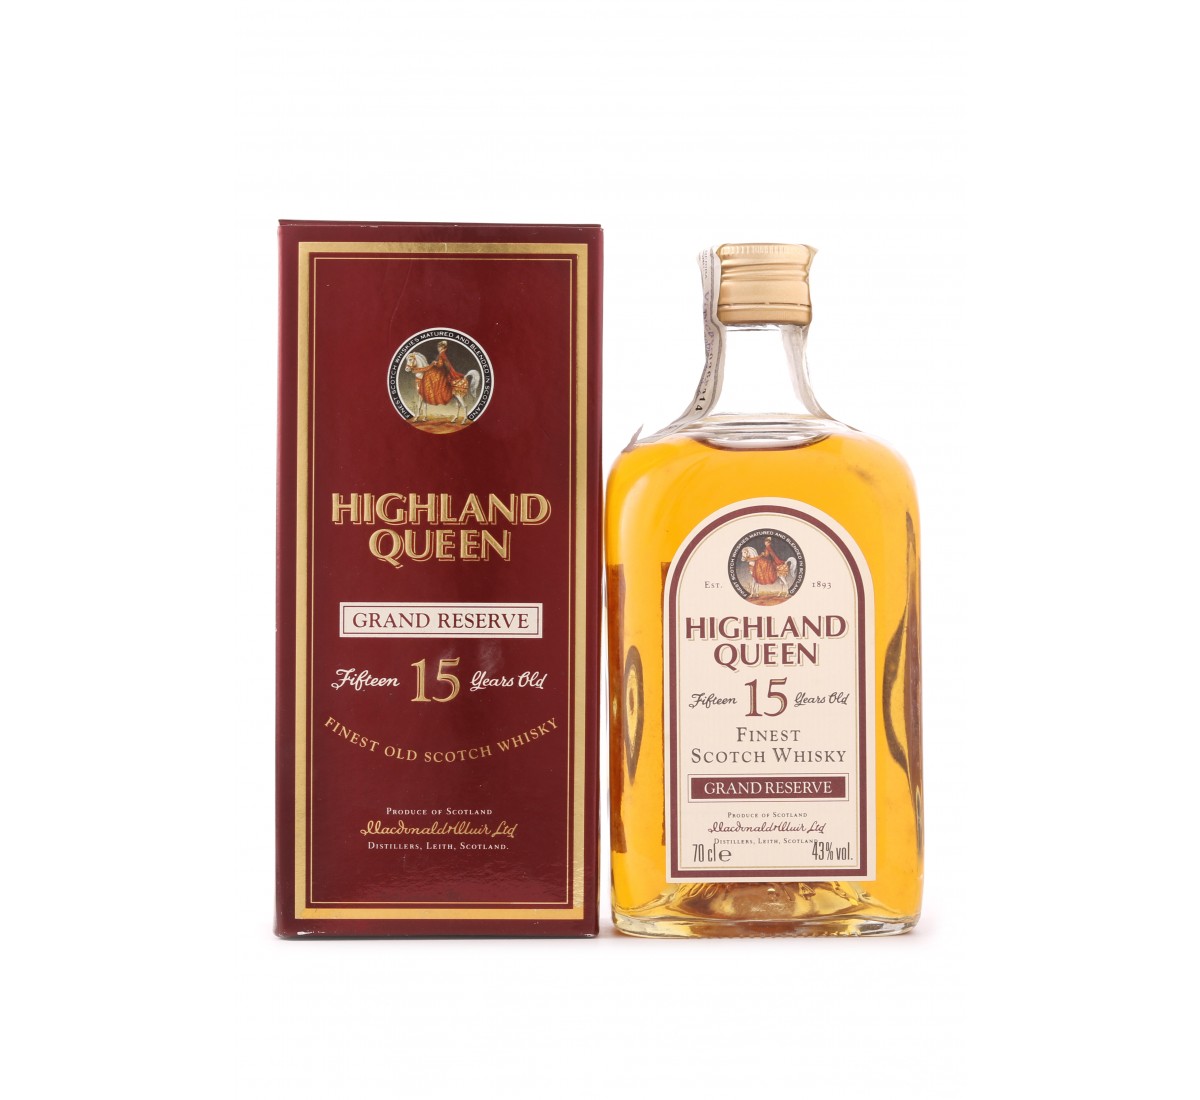 HIGHLAND QUEEN, 15 years old, grand reserve